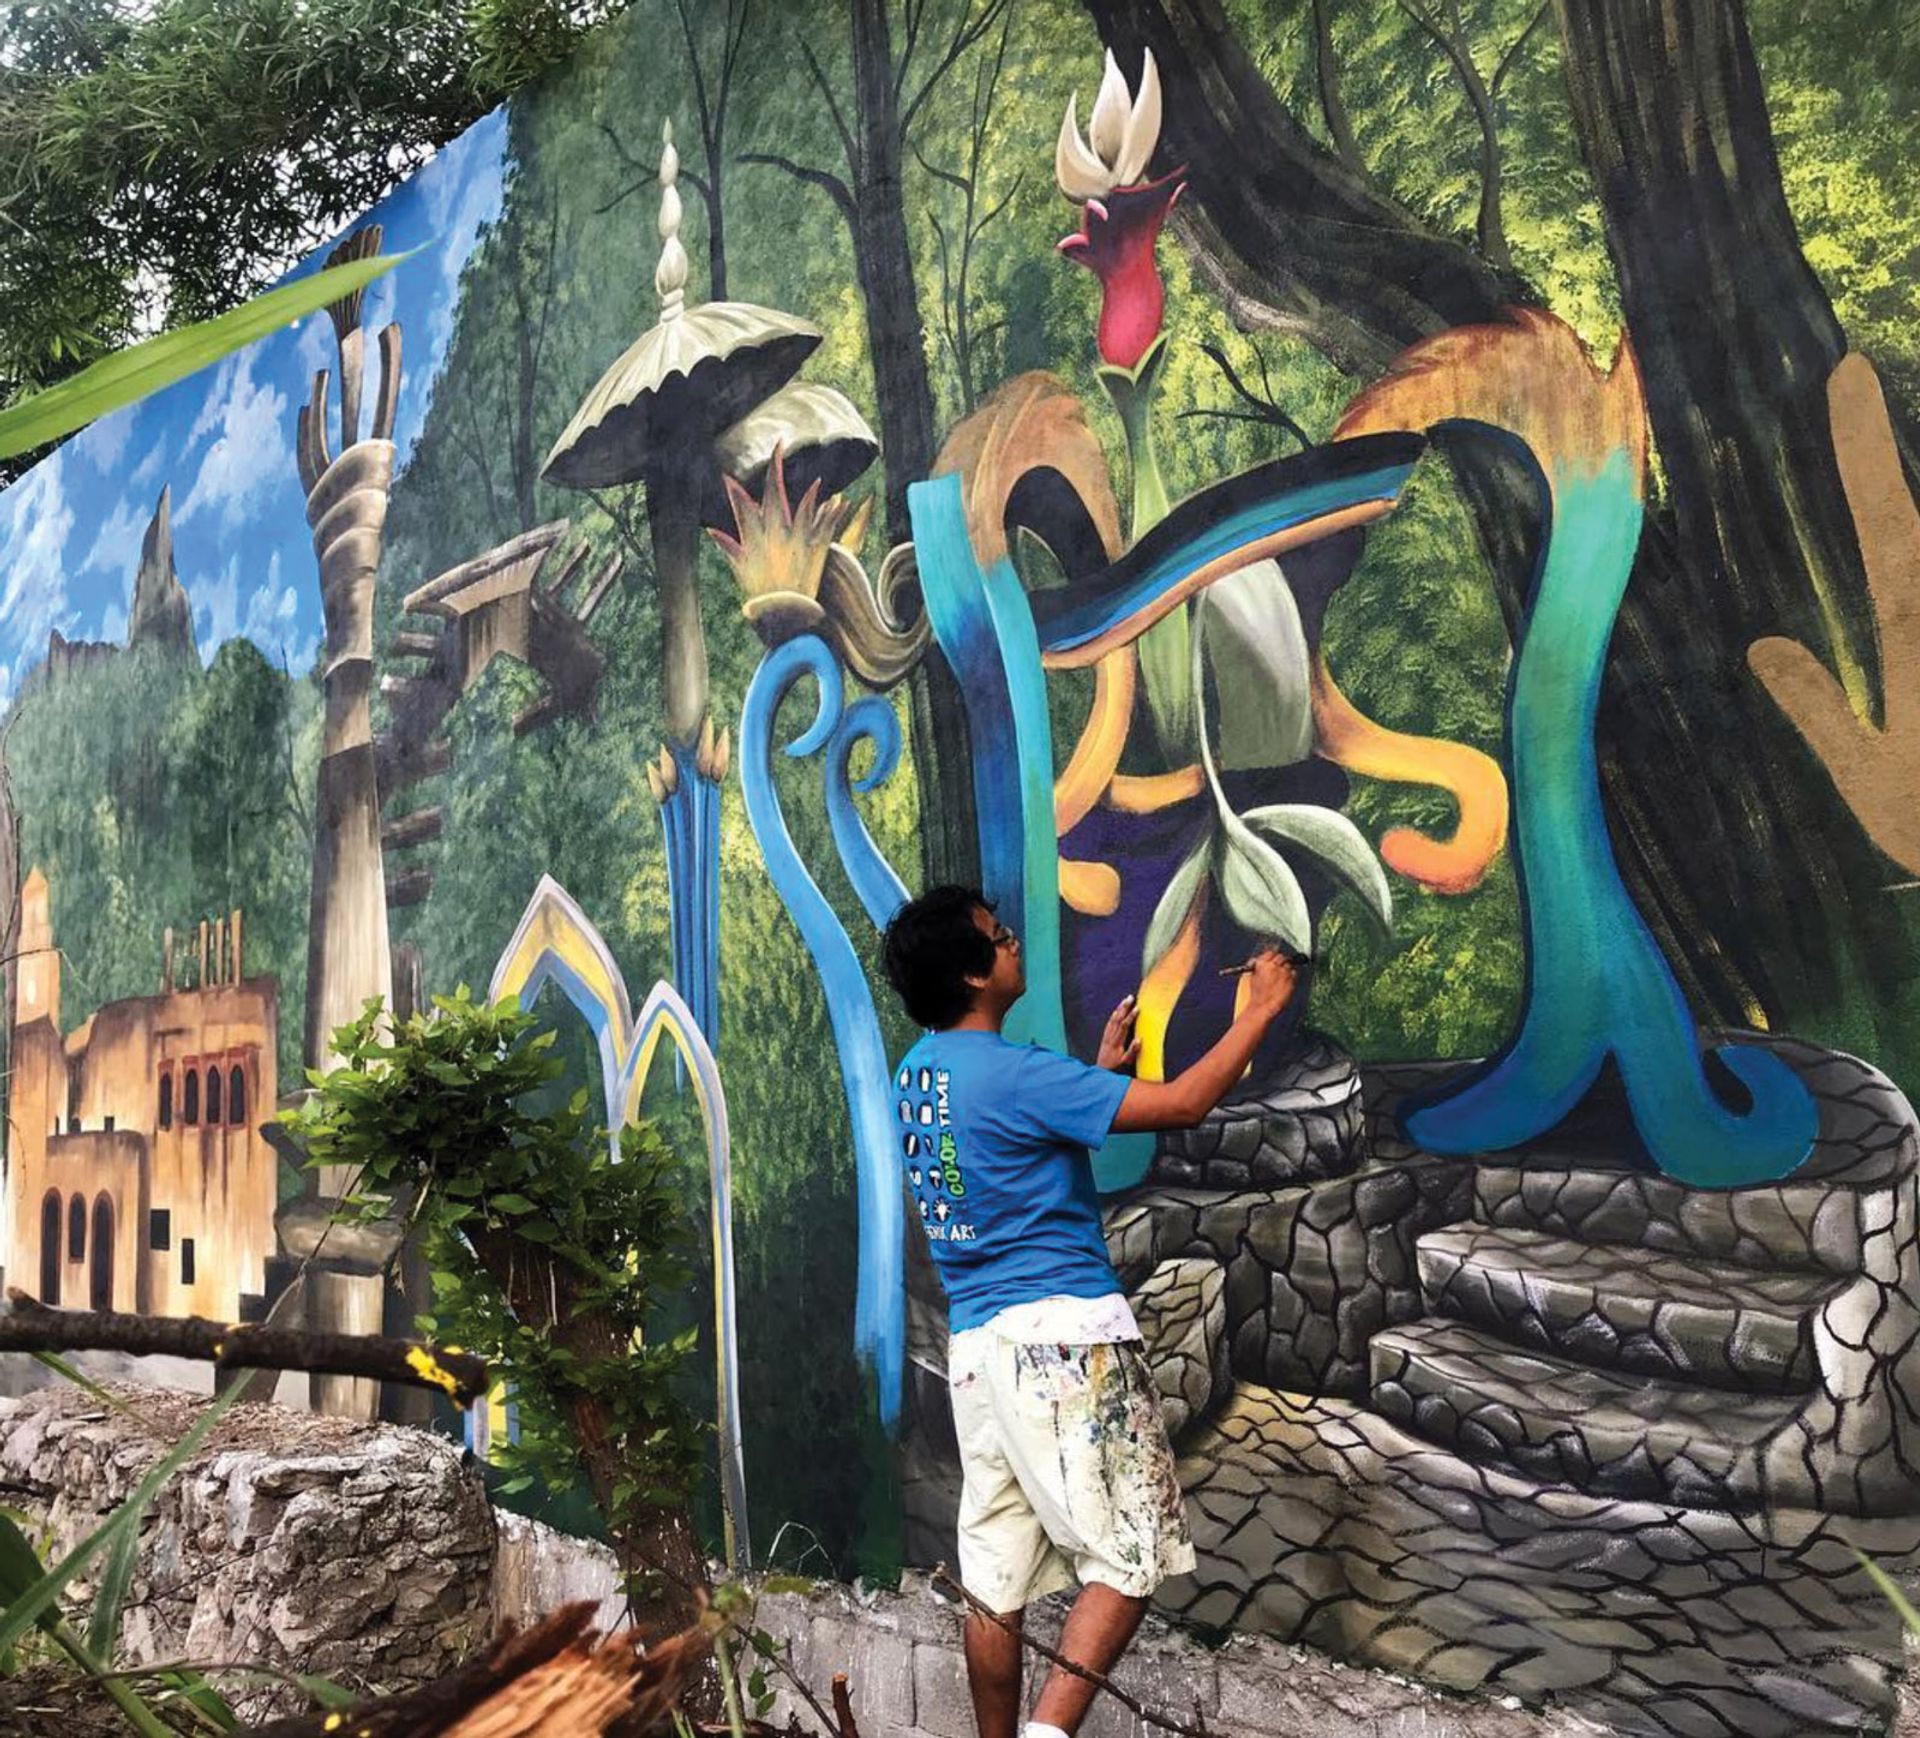 Héctor Domínguez working on a mural depicting the Surrealist gardens in Xilitla, near his home town, one  of many works he created with environmental themes www.instagram.com/hectordominguezr